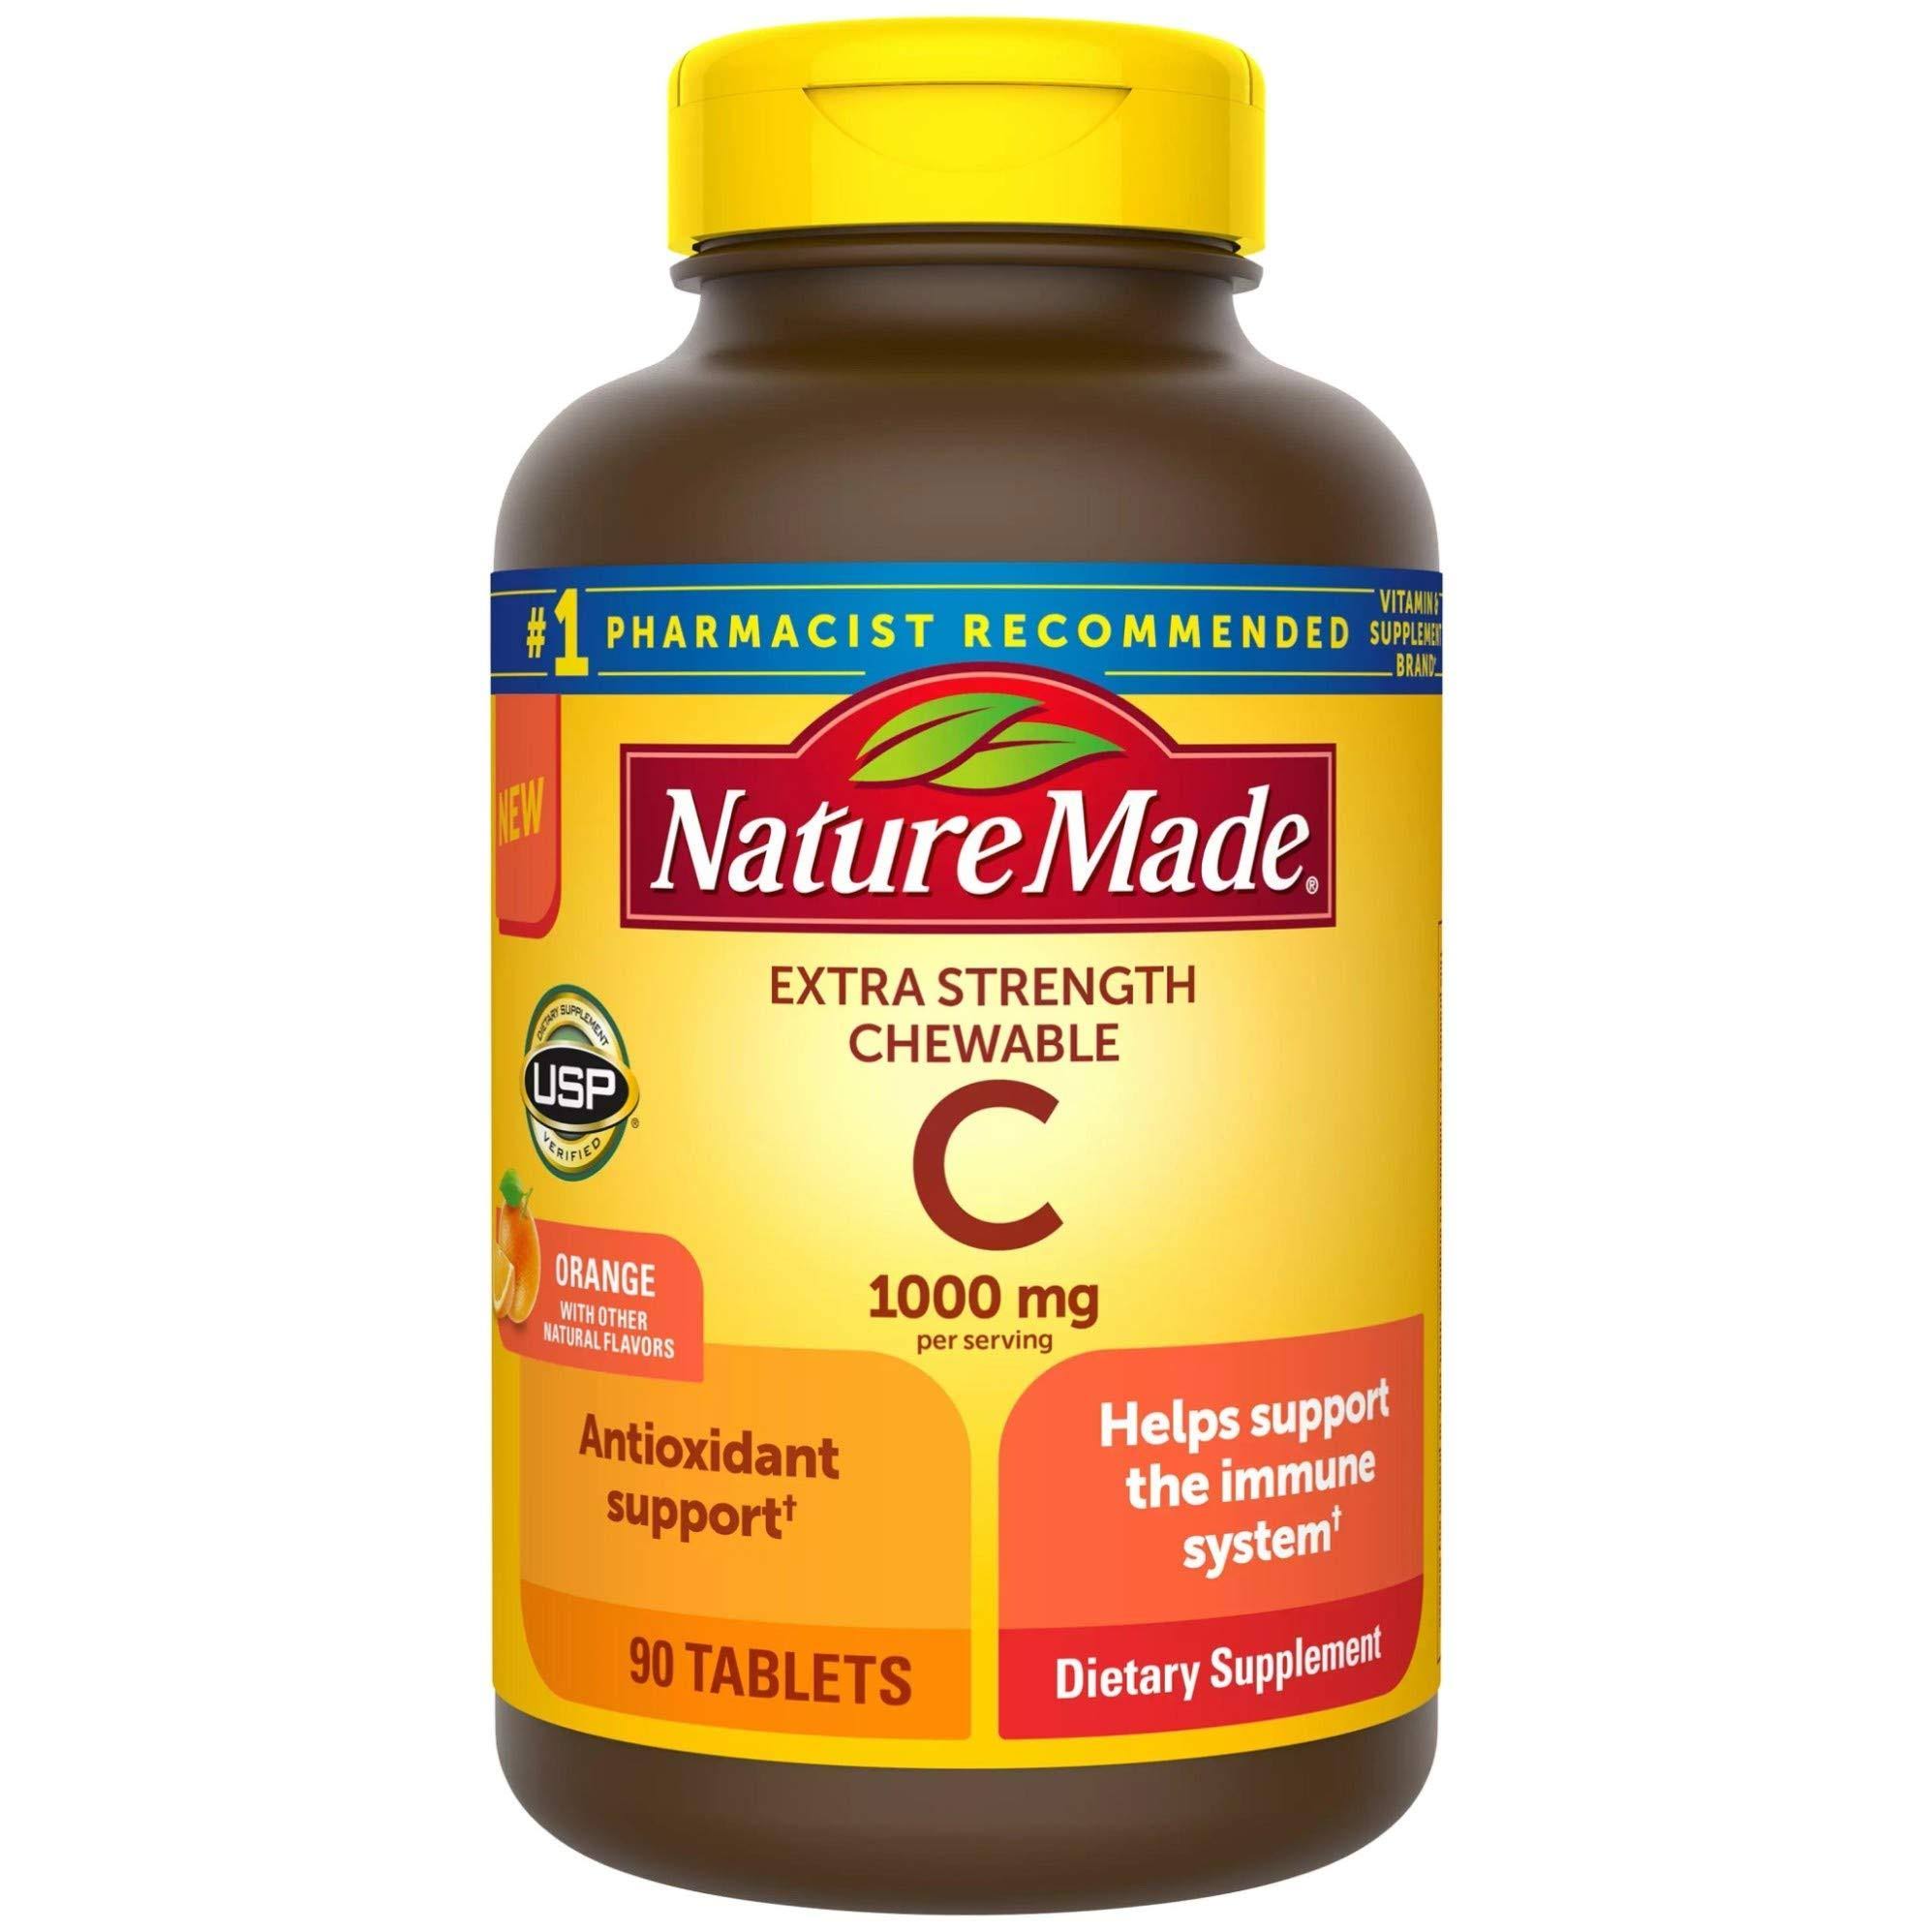 Nature Made Vitamin C, Extra Strength, 1000 mg, Chewable Tablets, Orange - 90 tablets